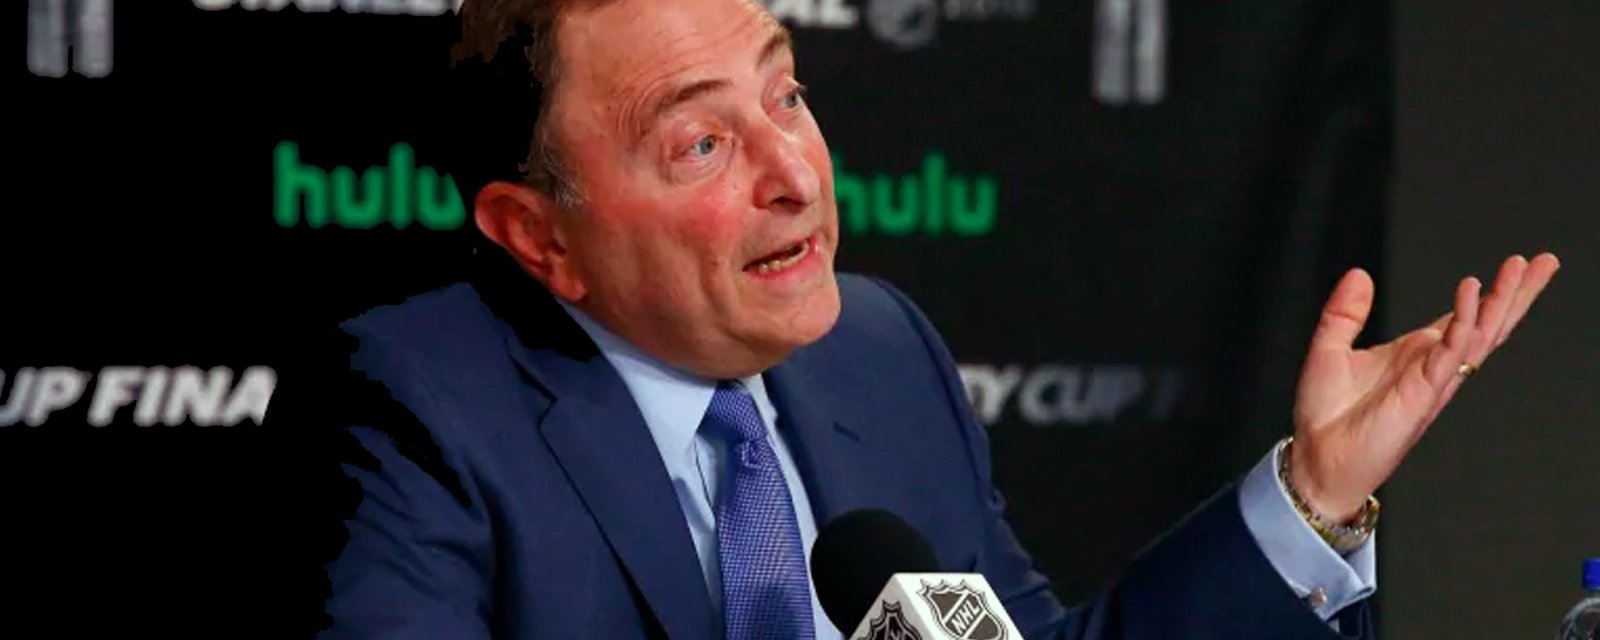 Bettman comments publicly on Sens’ financial problems and potential relocation